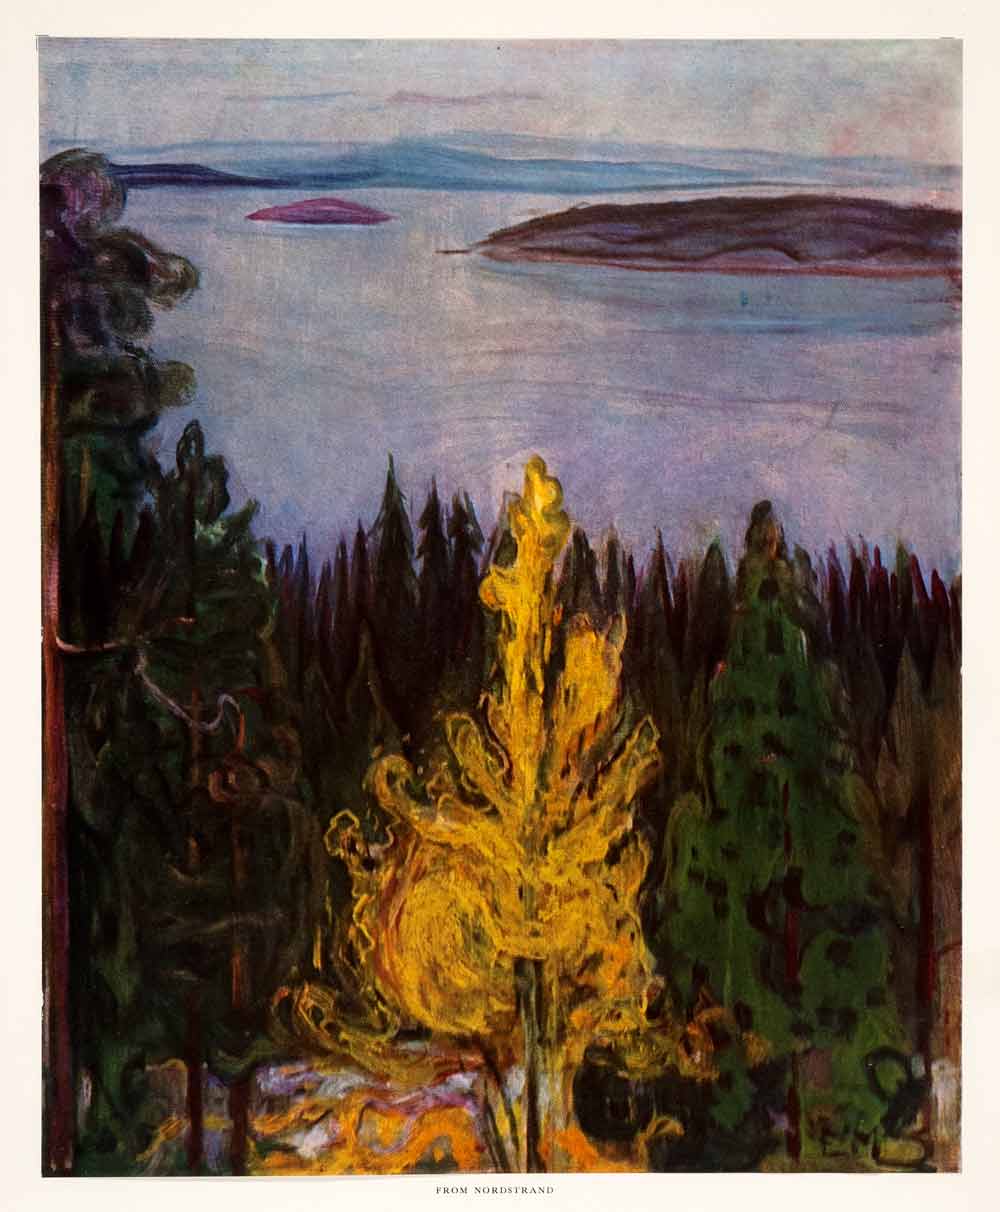 1958 Tipped-In Print Edvard Munch From Nordstrand Landscape Water Forest Art